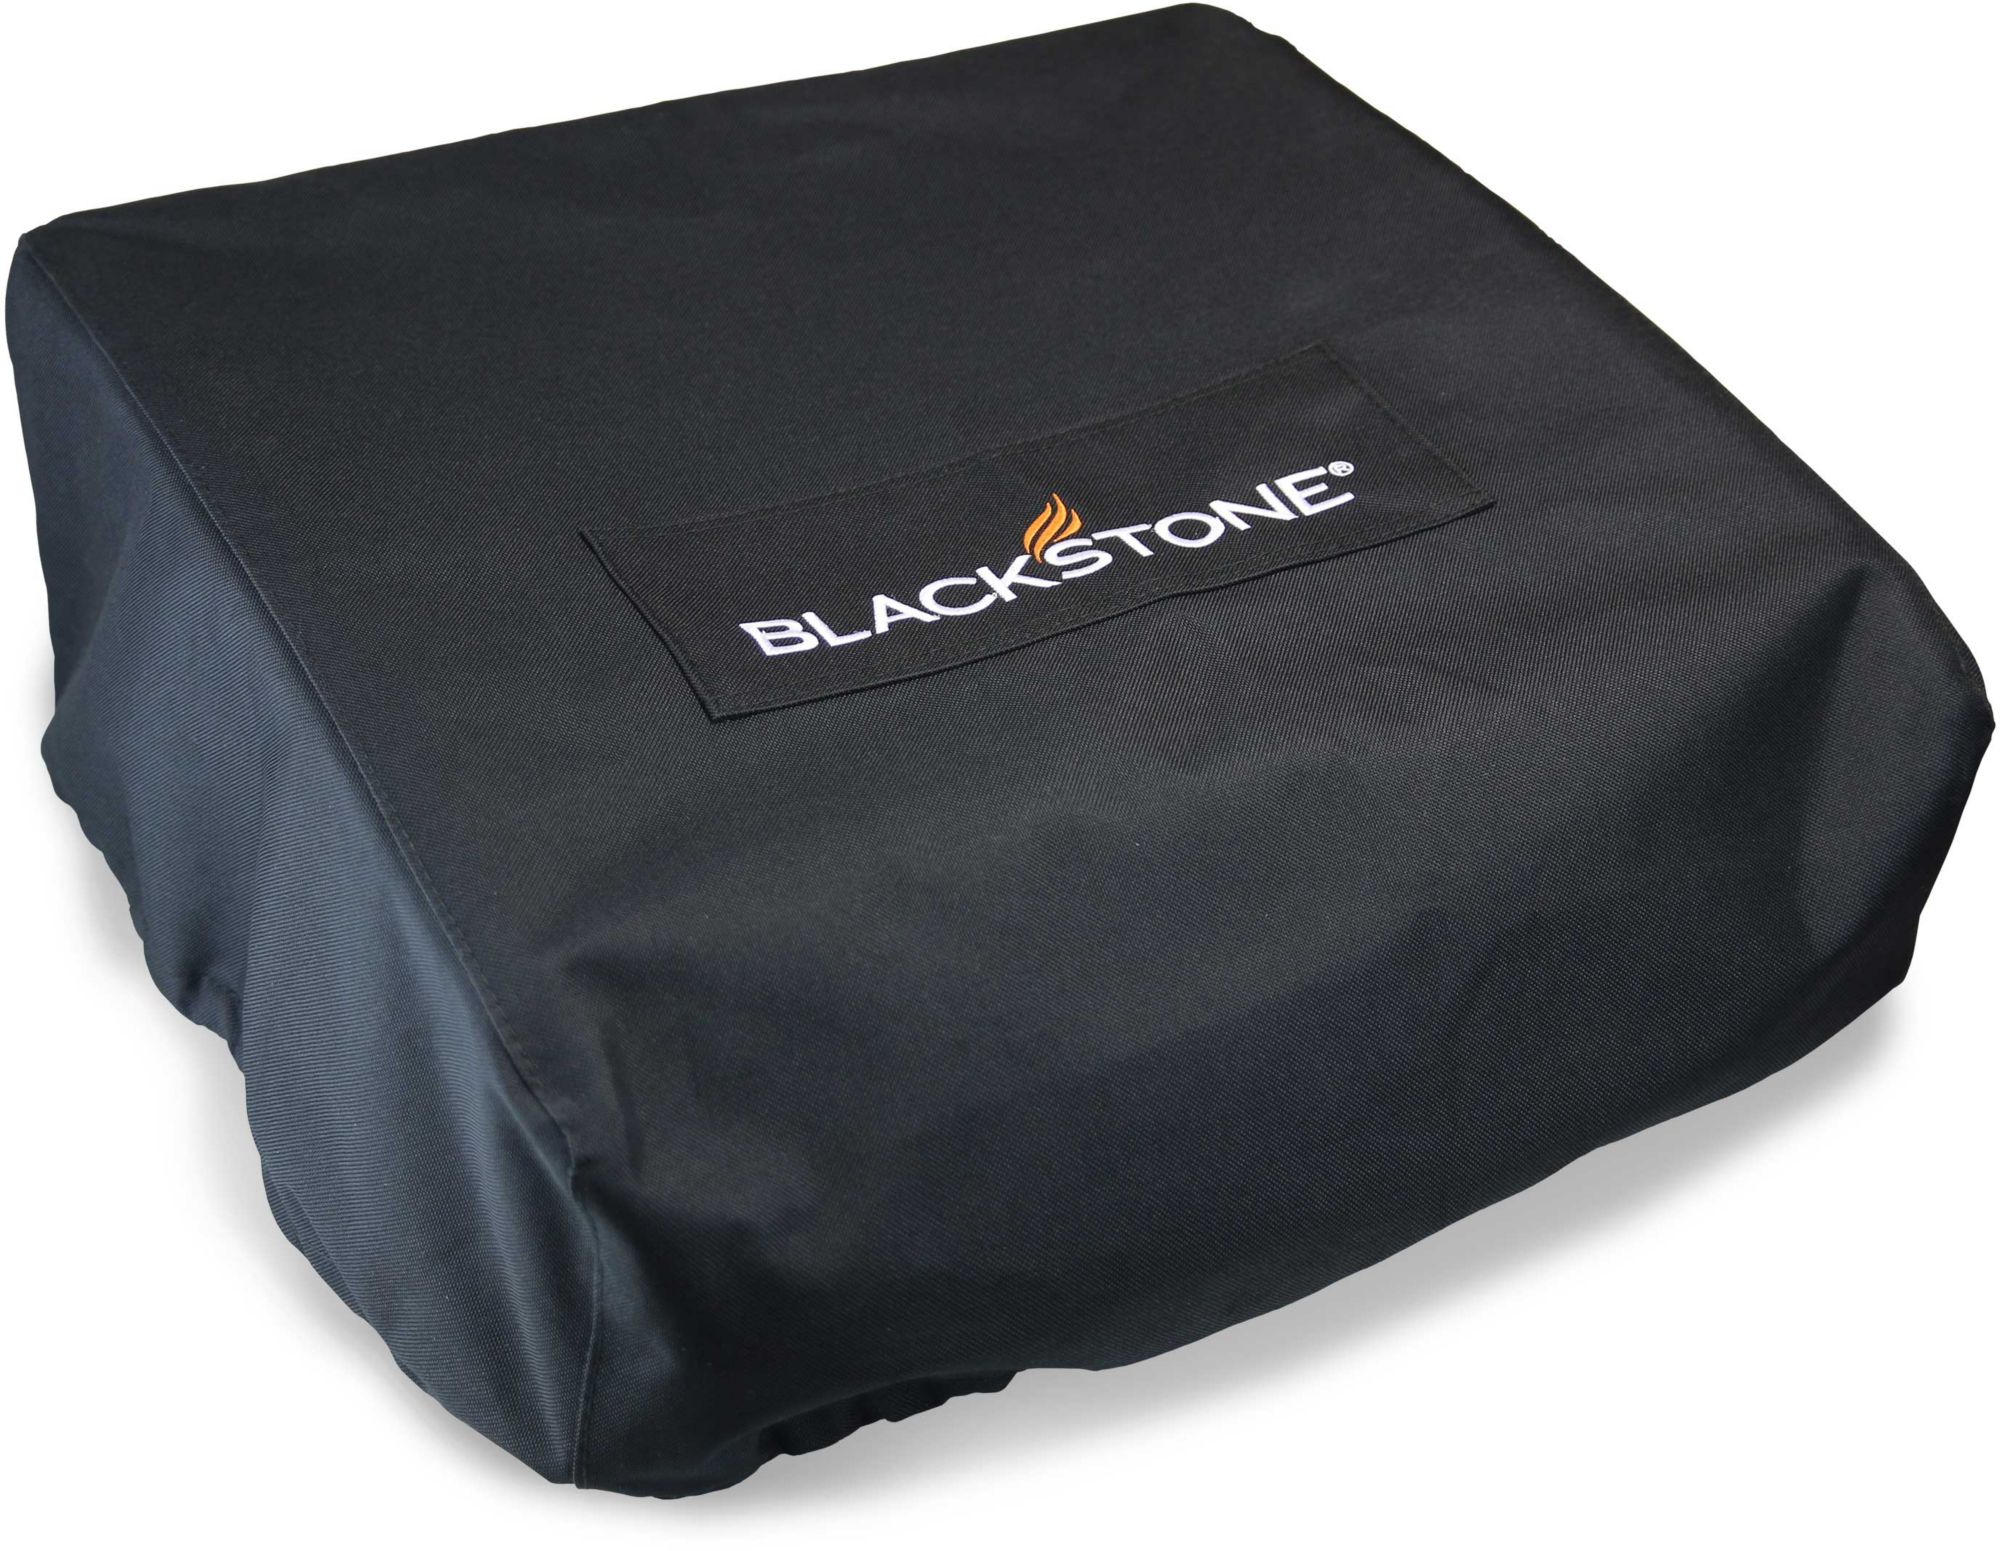 Blackstone 17'' Griddle Cover and Carry Bag Field & Stream